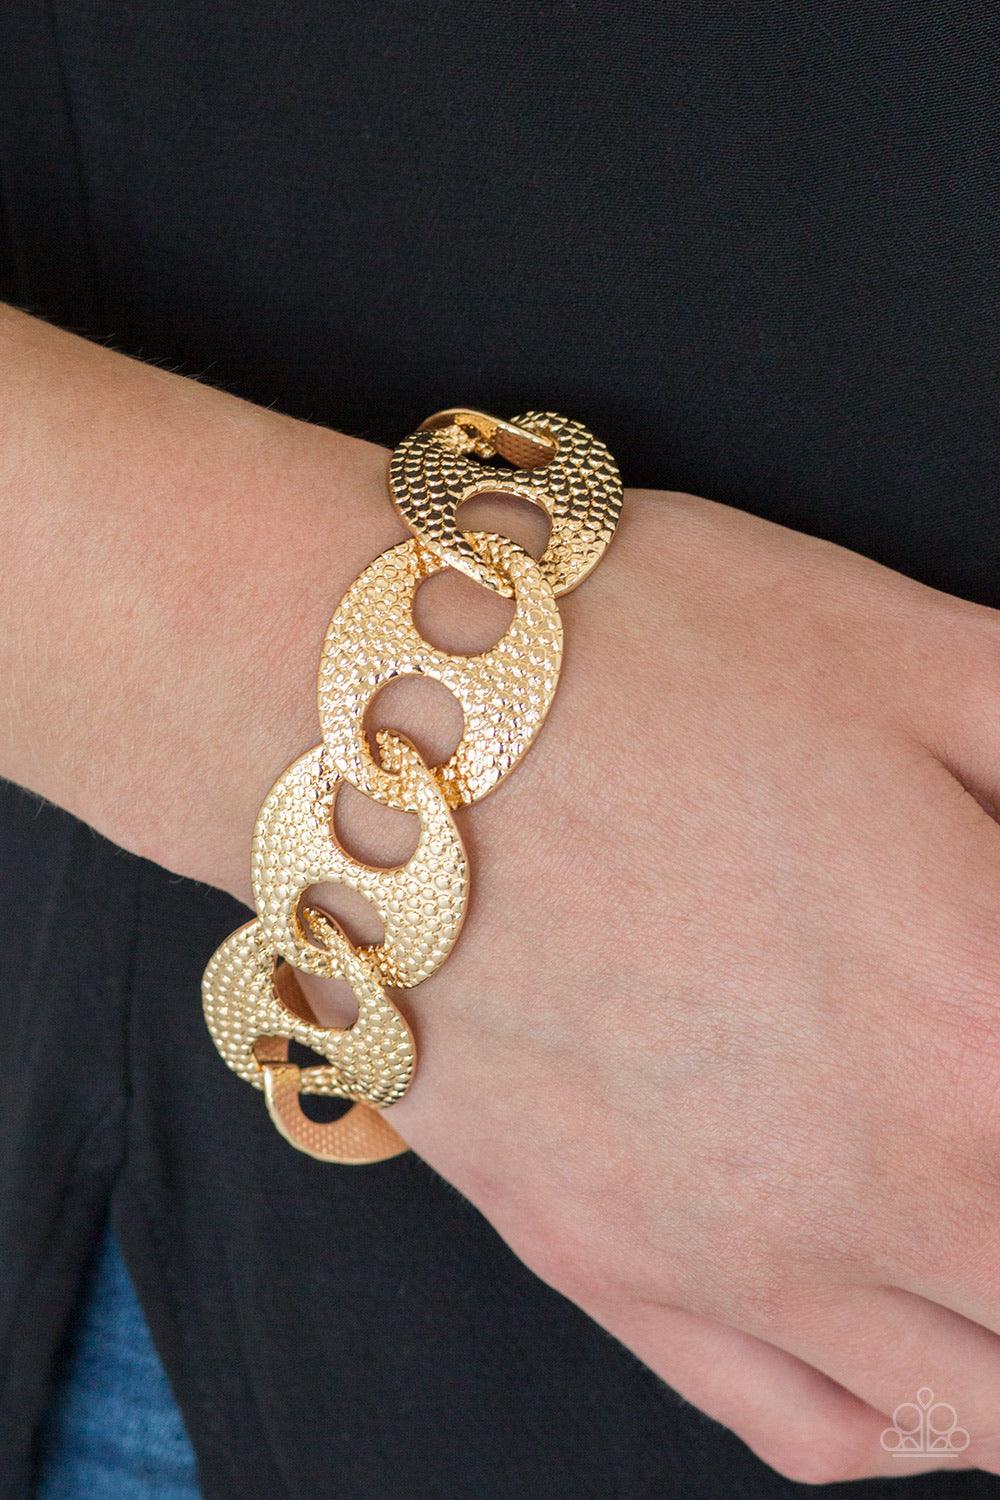 Paparazzi Accessories Casual Connossieur - Gold Embossed in shimmery circular patterns, asymmetrical gold frames link across the wrist for a casually industrial look. Features an adjustable clasp closure. Jewelry